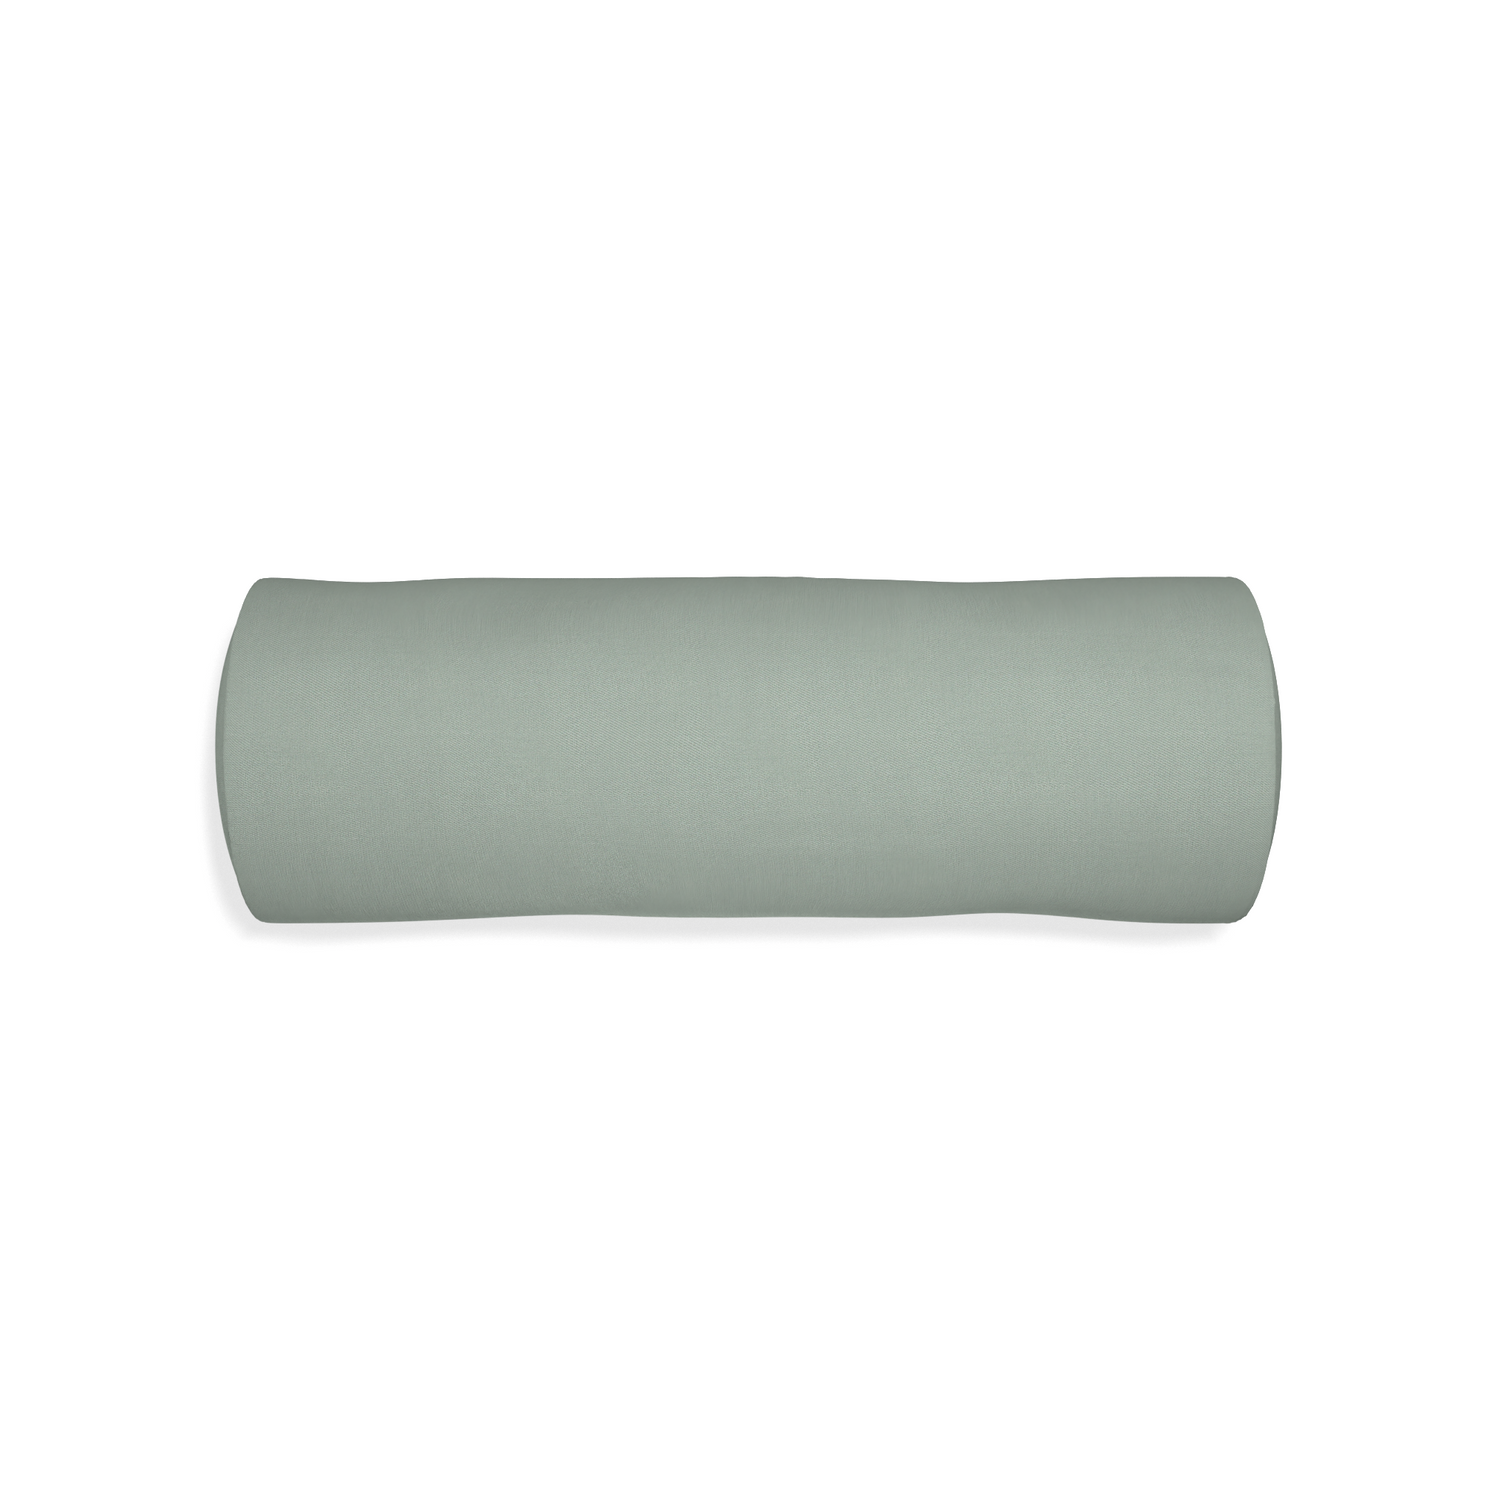 Bolster sage custom sage green cottonpillow with none on white background